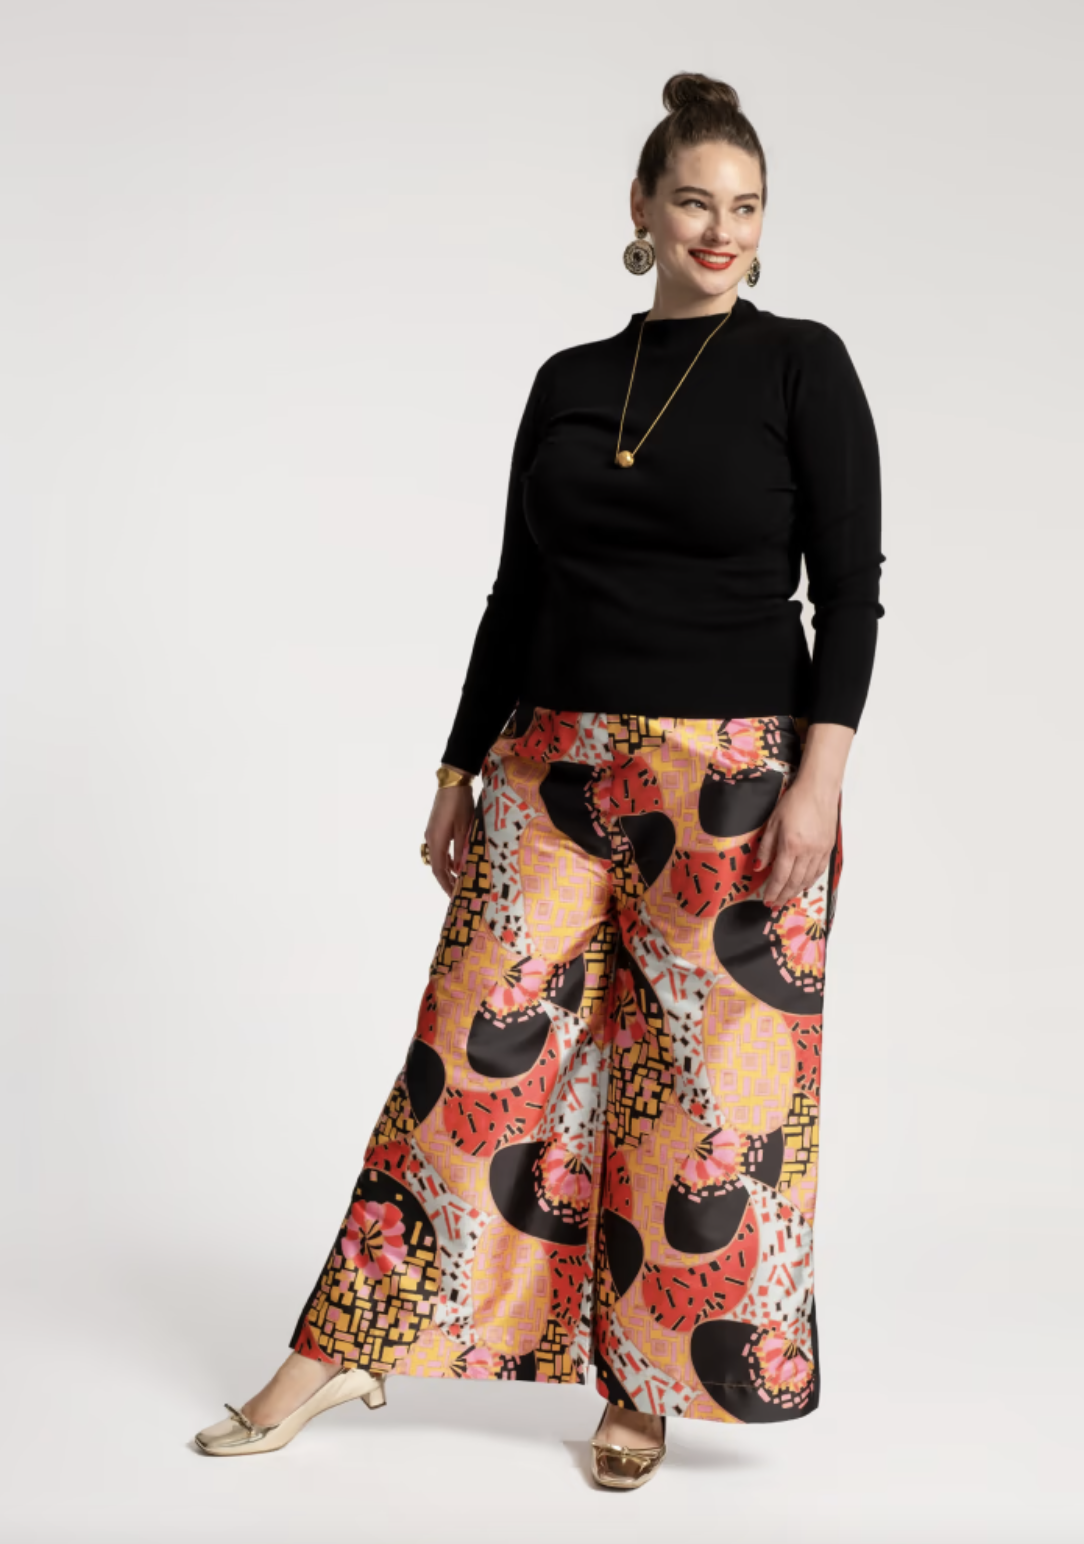 Women's Two Piece Outfits 2023 Off Shoulder Casual Crop Tops Blouse and  High Waist Palazzo Pants Set - Walmart.com